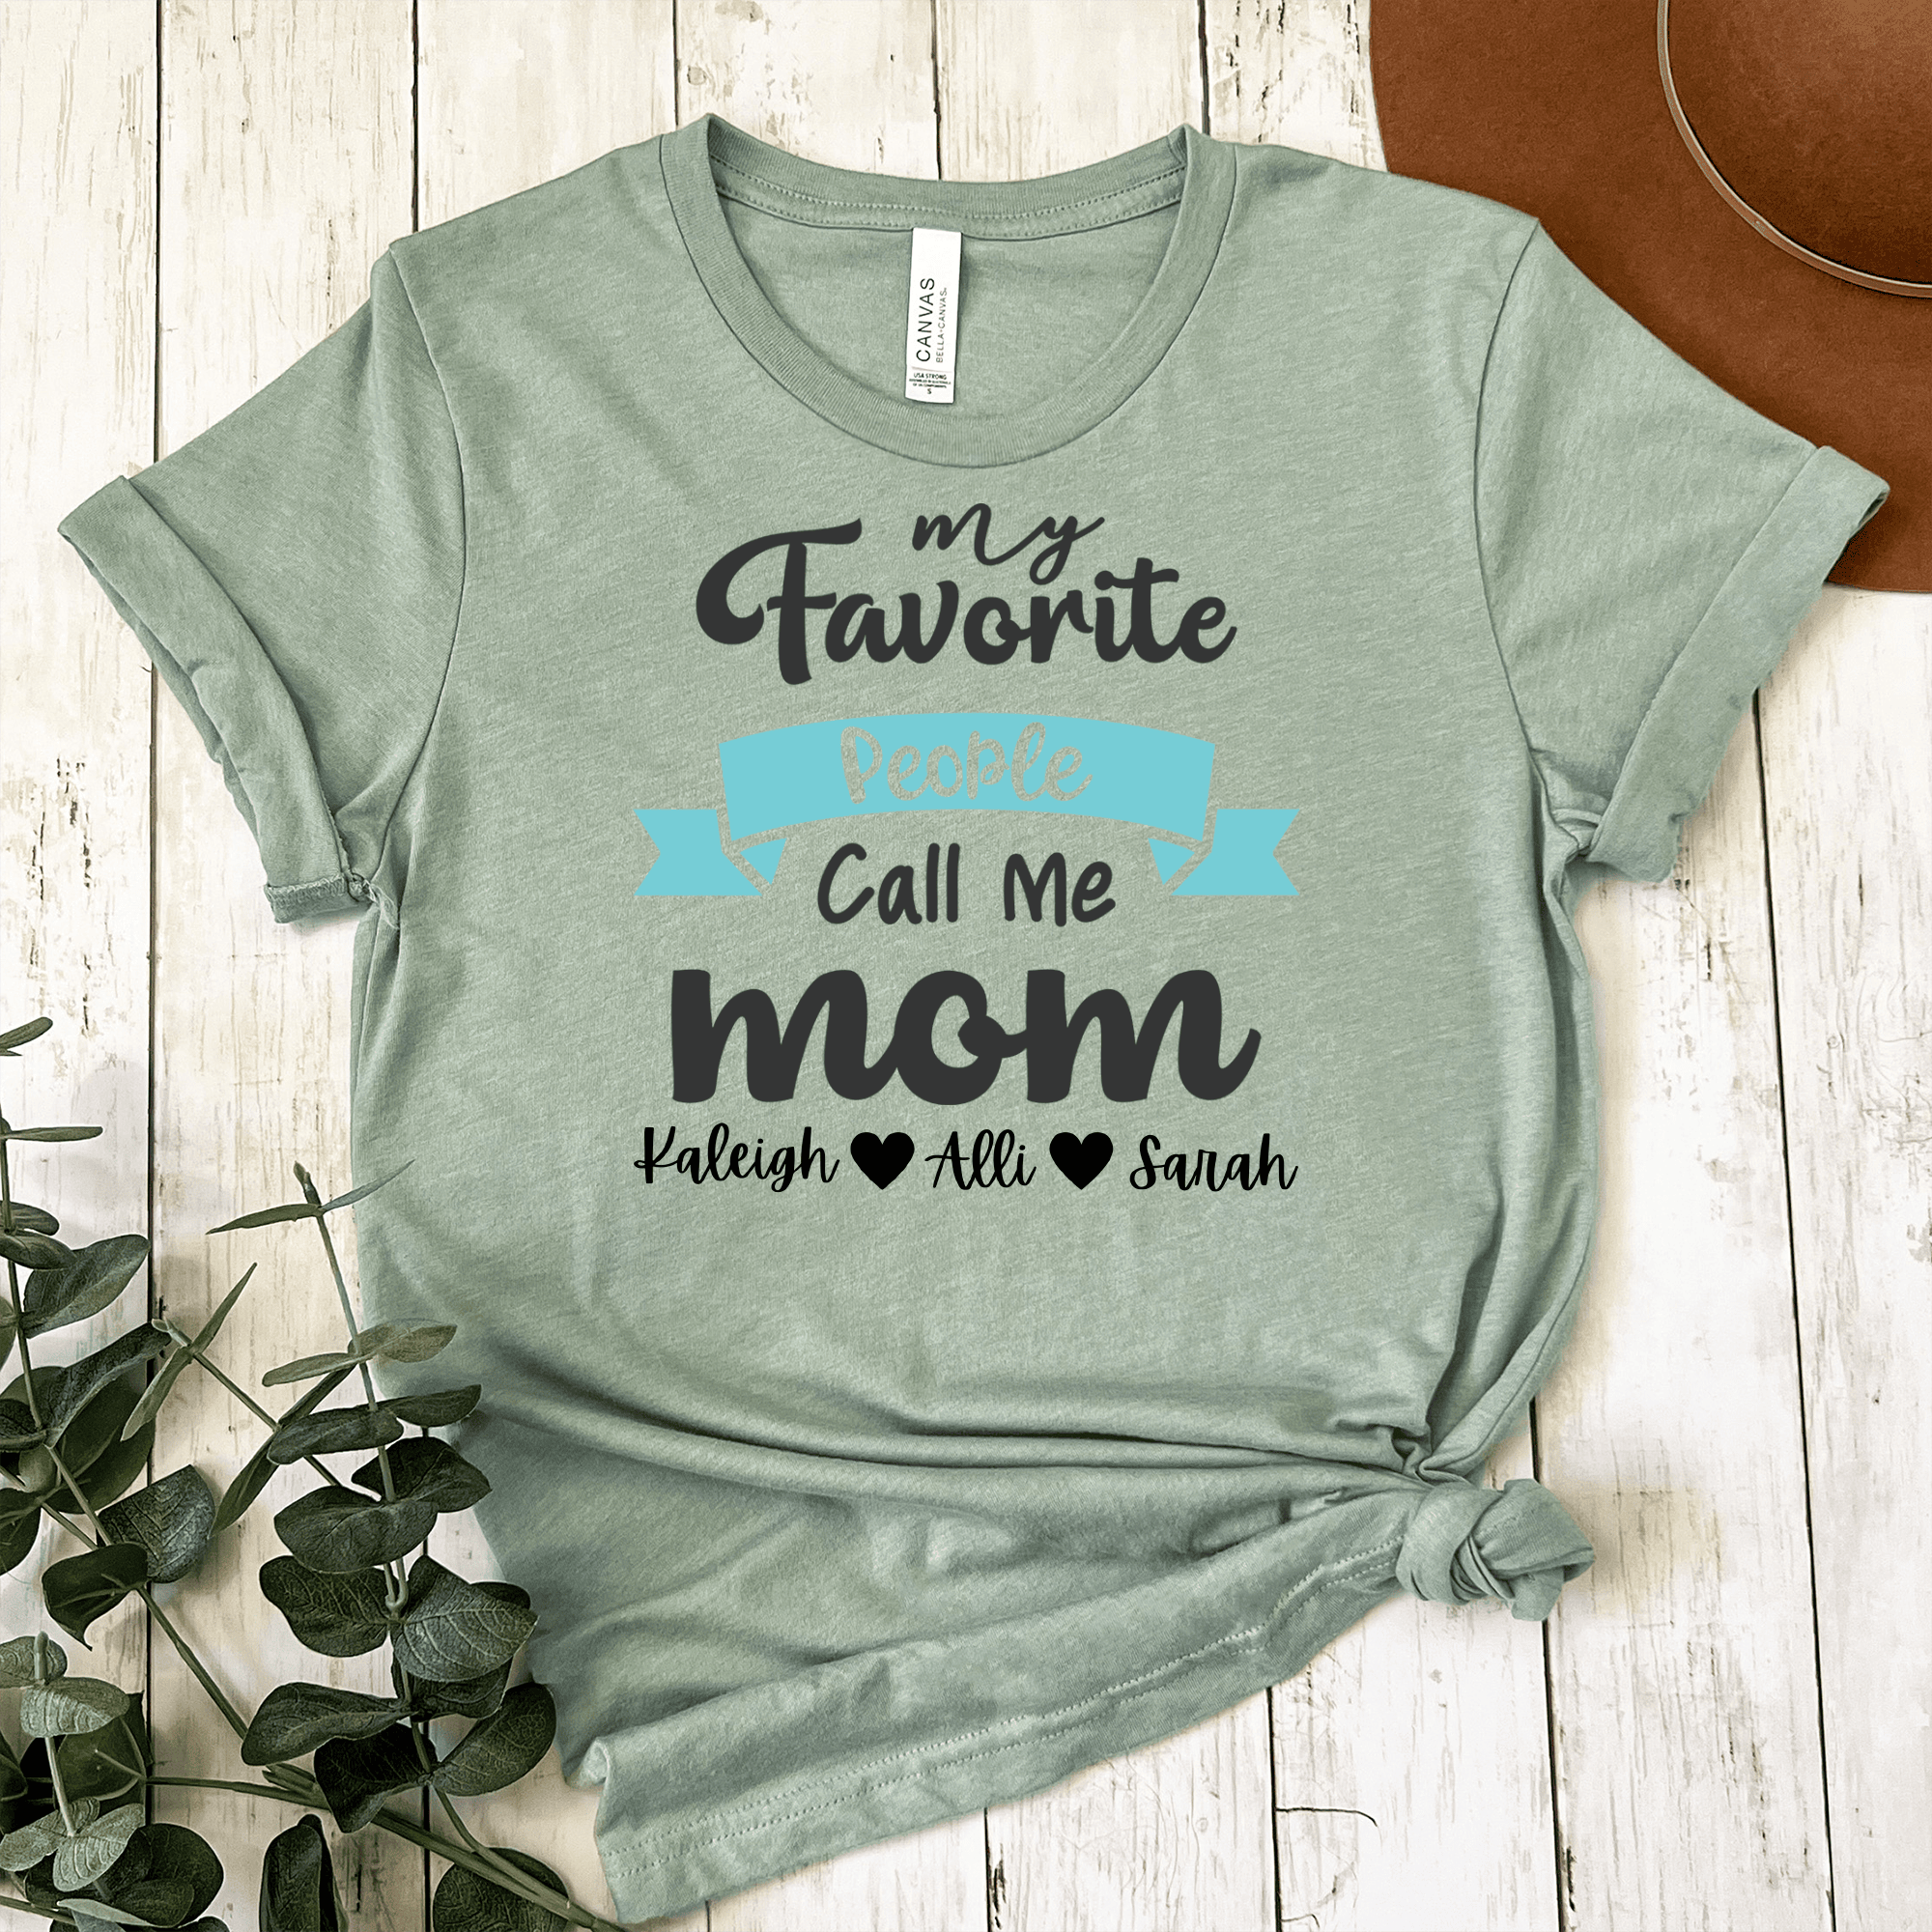 Womens Light Green T Shirt with Favorite-People-Call-Me-Mom design